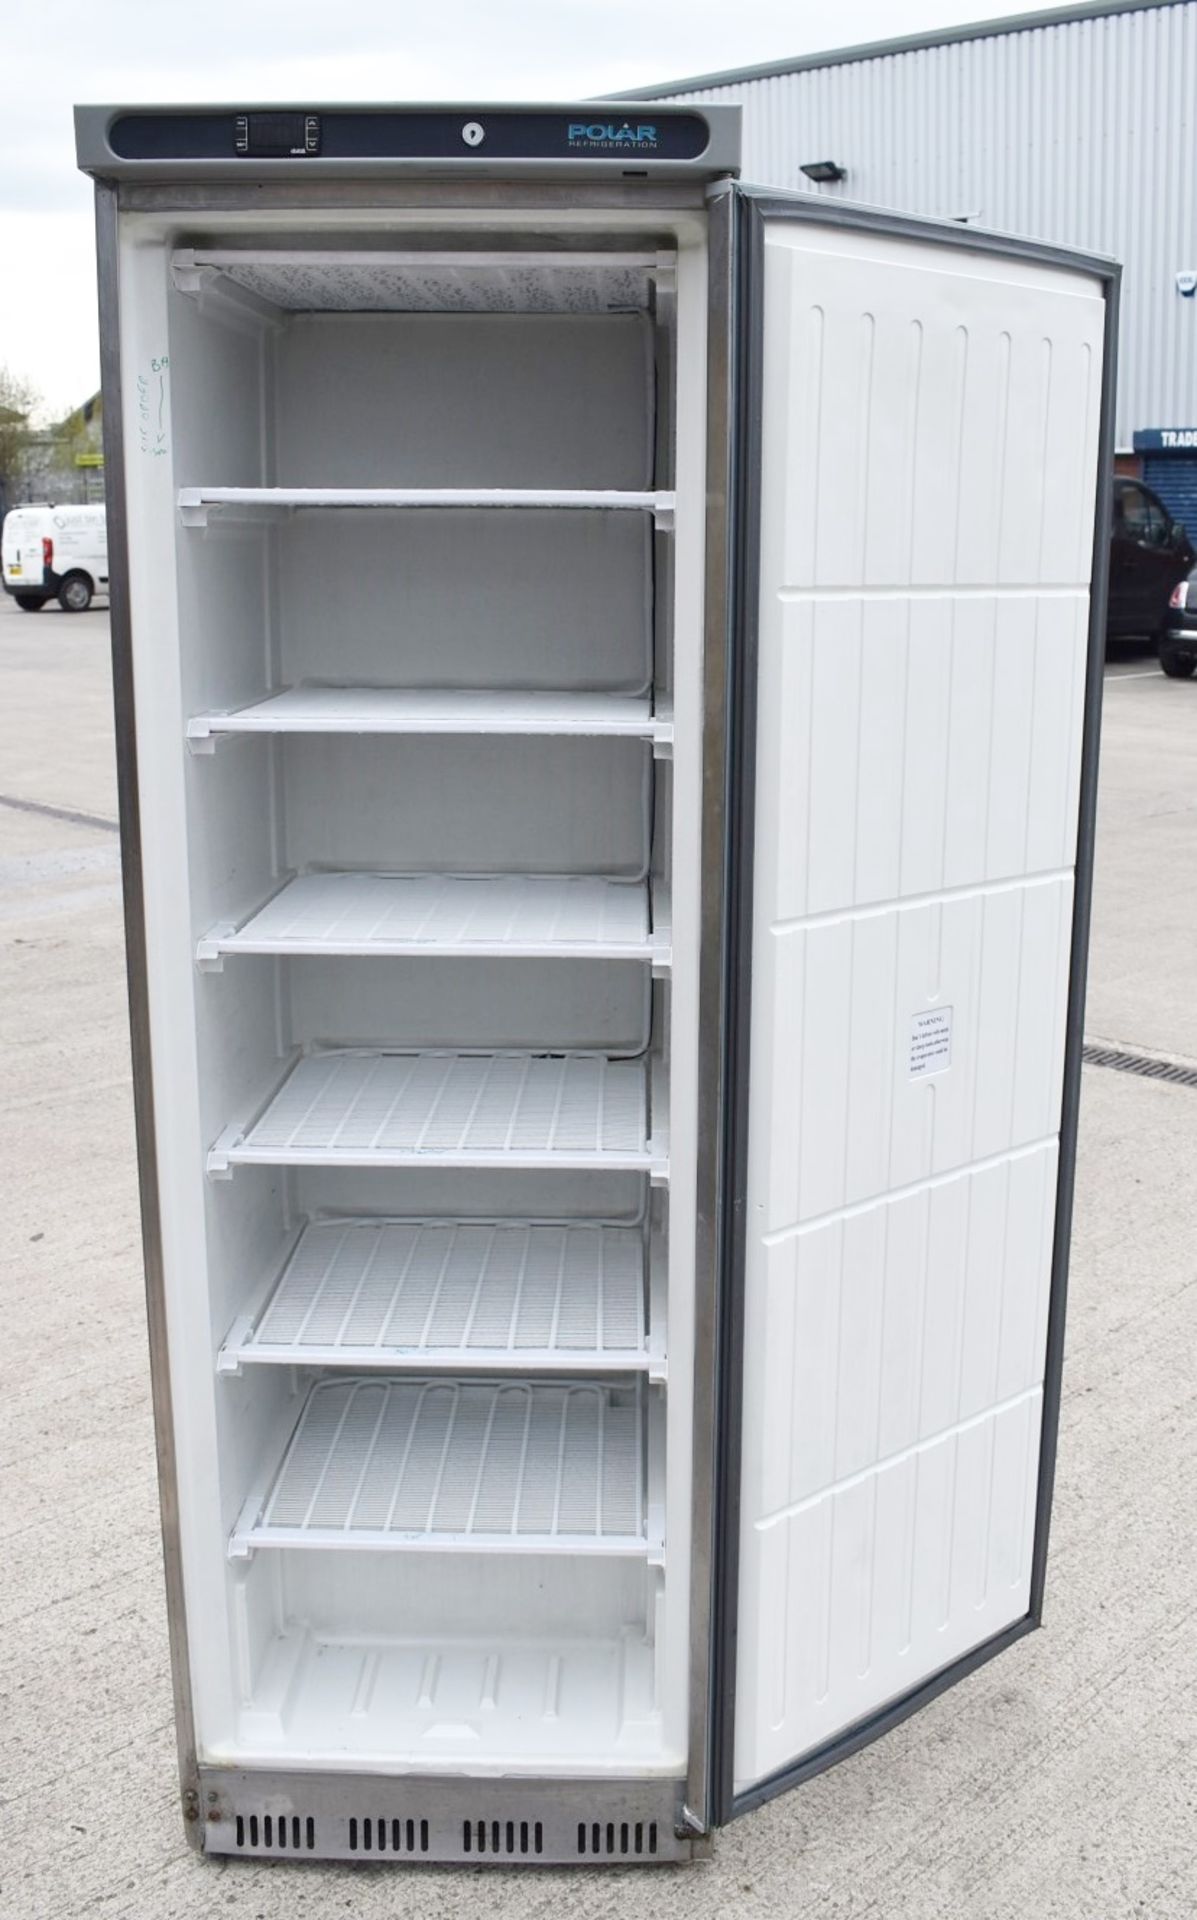 1 x Polar CD083 Upright Freezer With Stainless Steel Exterior - Dimensions: H185 x W60 x D60 cms